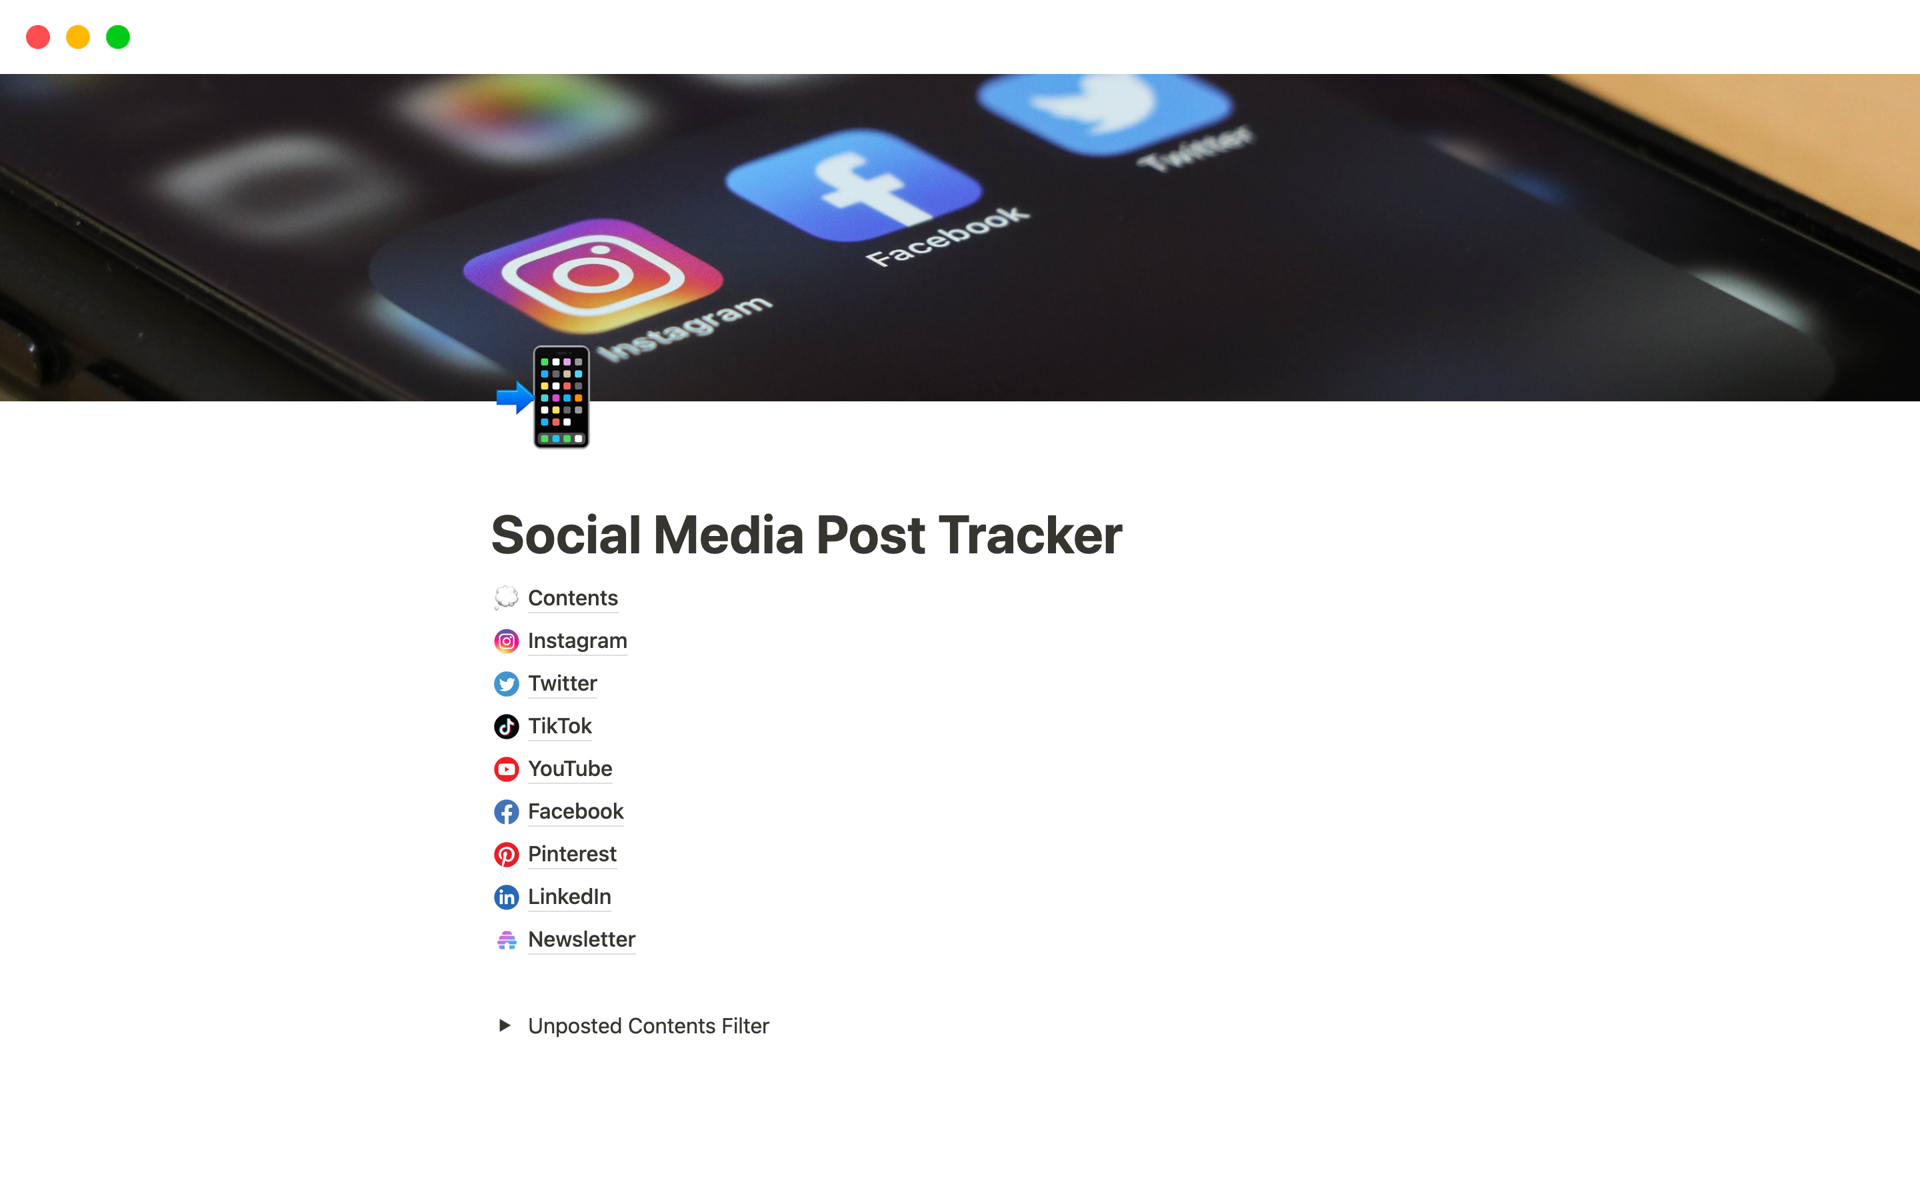 Tracking the posts for multi-platforms on social media